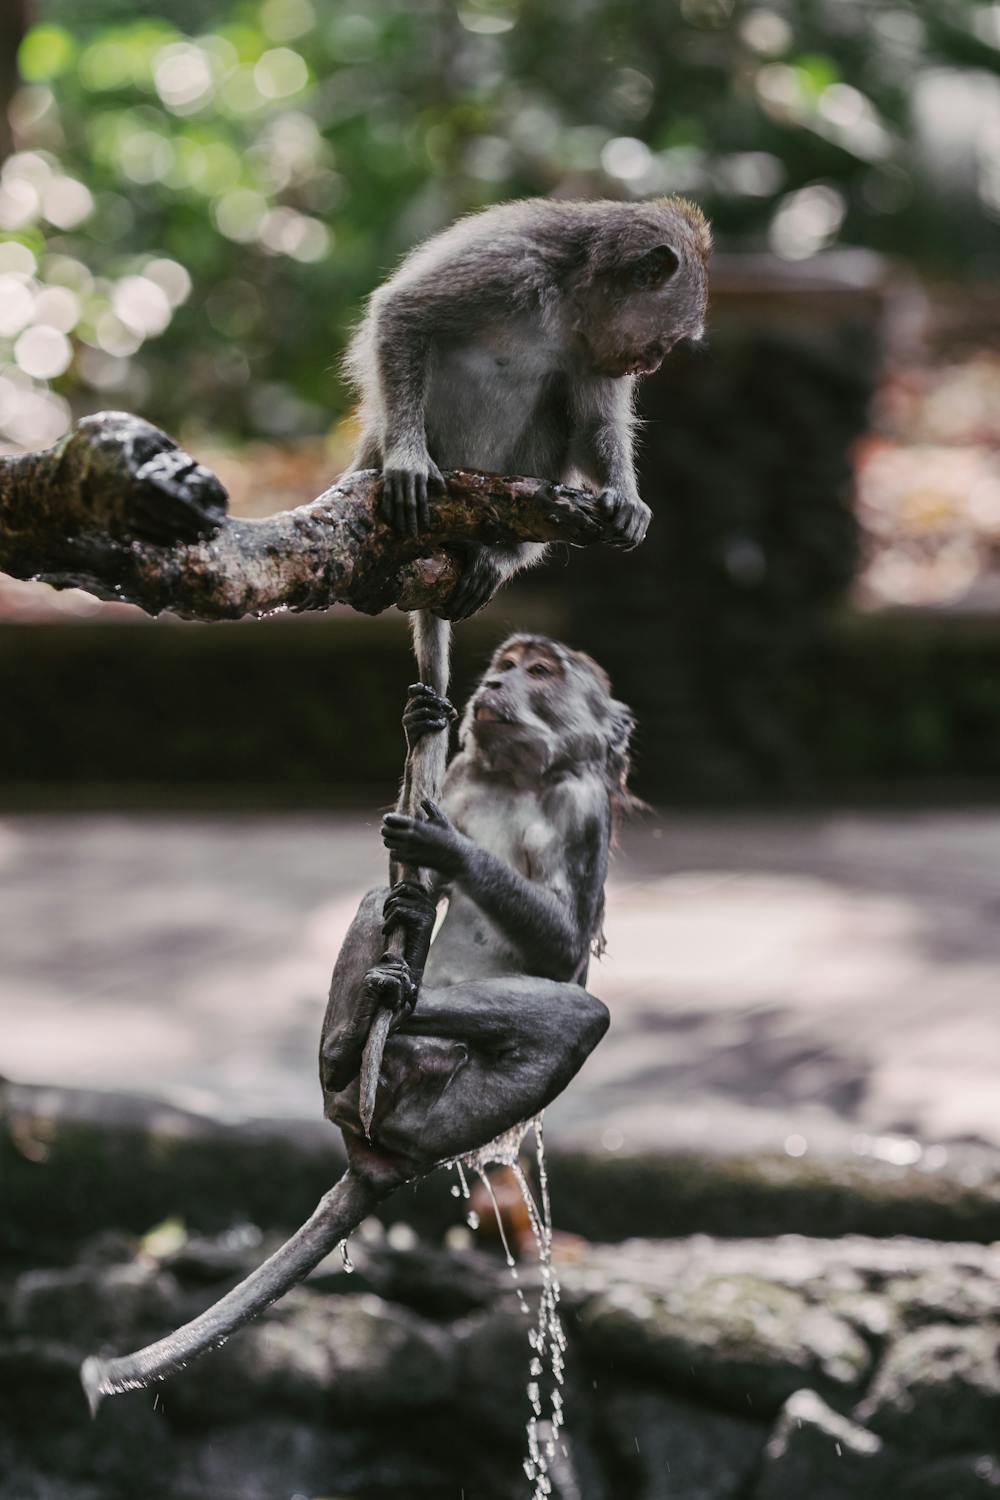 monkey grabbing the tail of another monkey